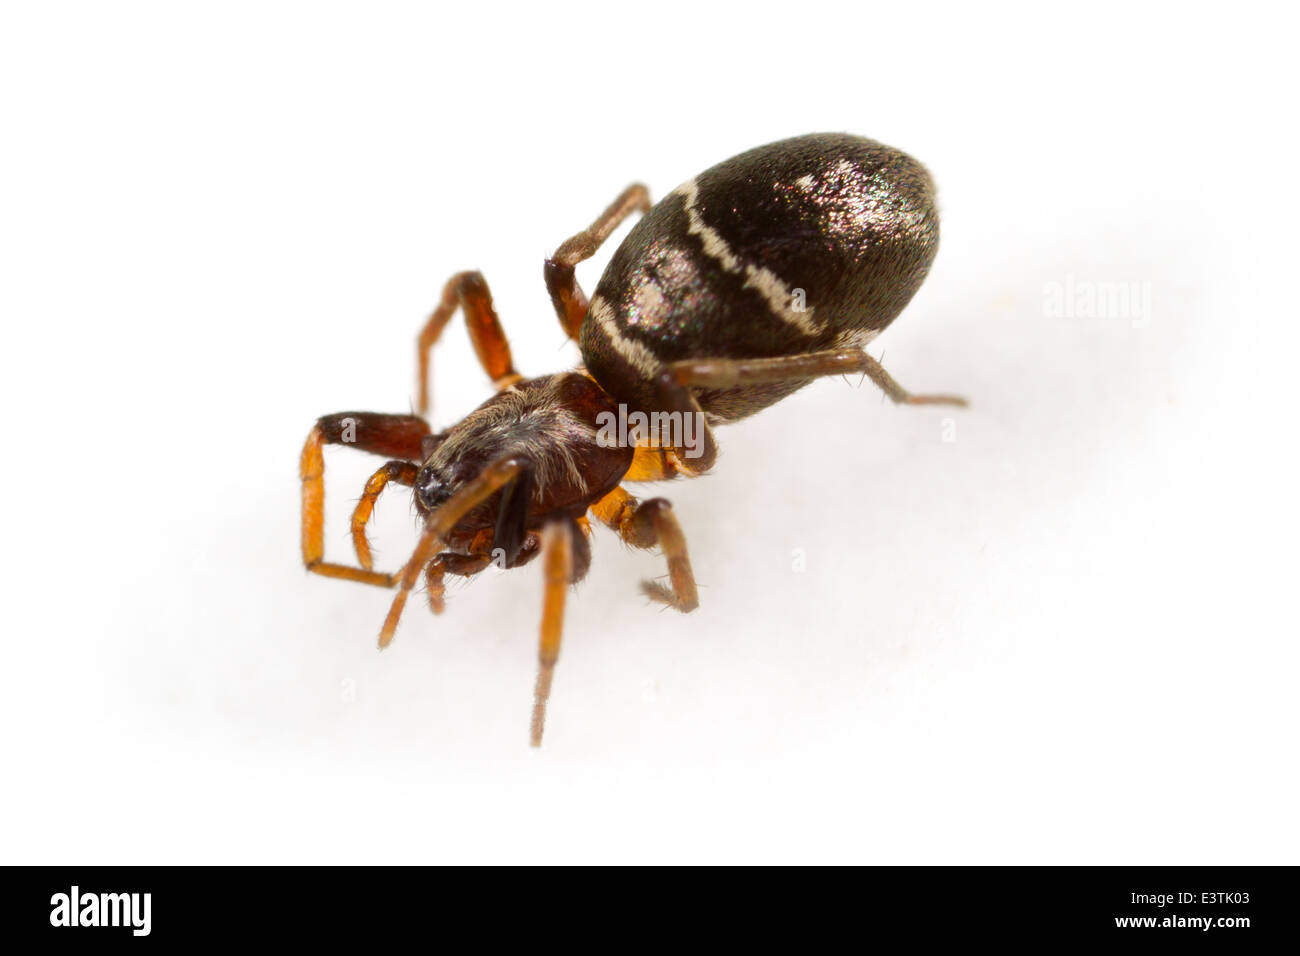 Female Glossy ant-spider (Micaria pulicaria), part of the family Gnaphosidae - Stealthy ground spiders. Isolated on white. Stock Photo